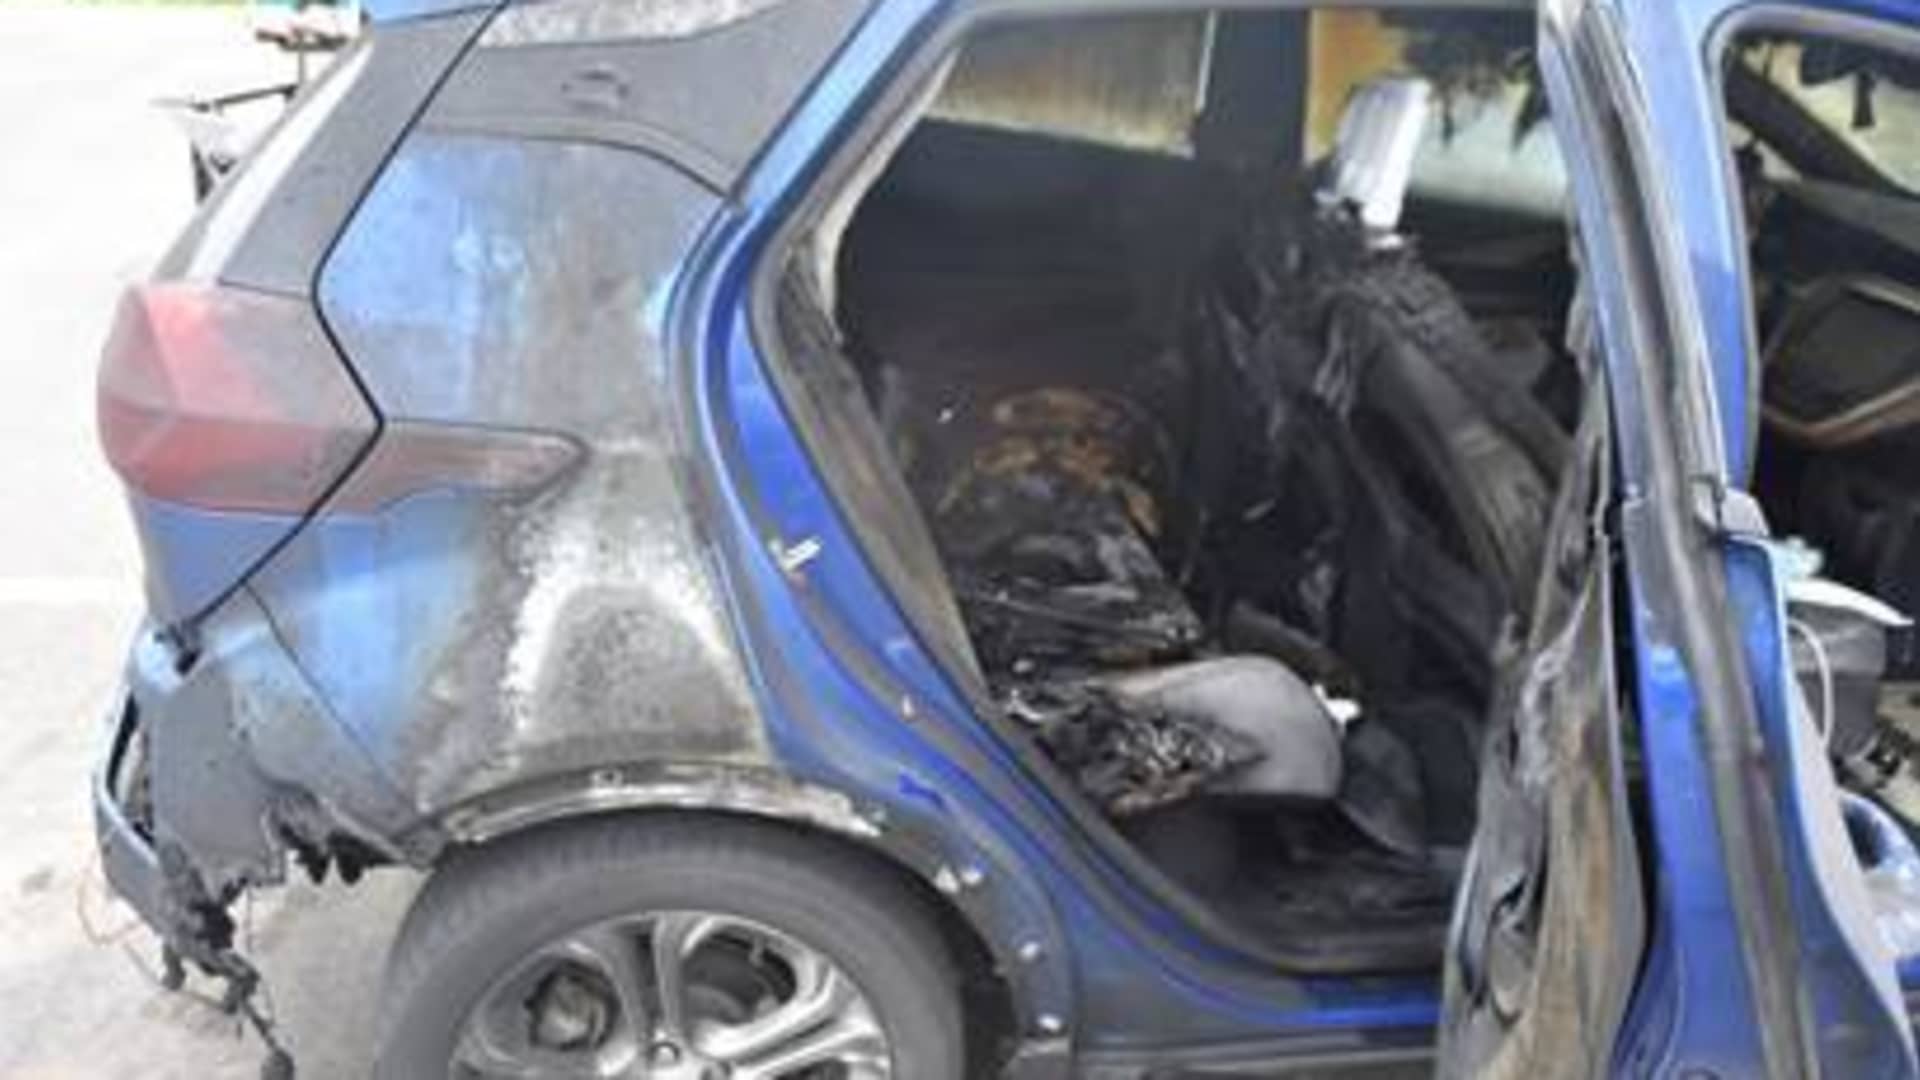 The Vermont State Police released this photo of the 2019 Chevrolet Bolt EV that caught fire on July 1, 2021 in the driveway of state Rep. Timothy Briglin, a Democrat.